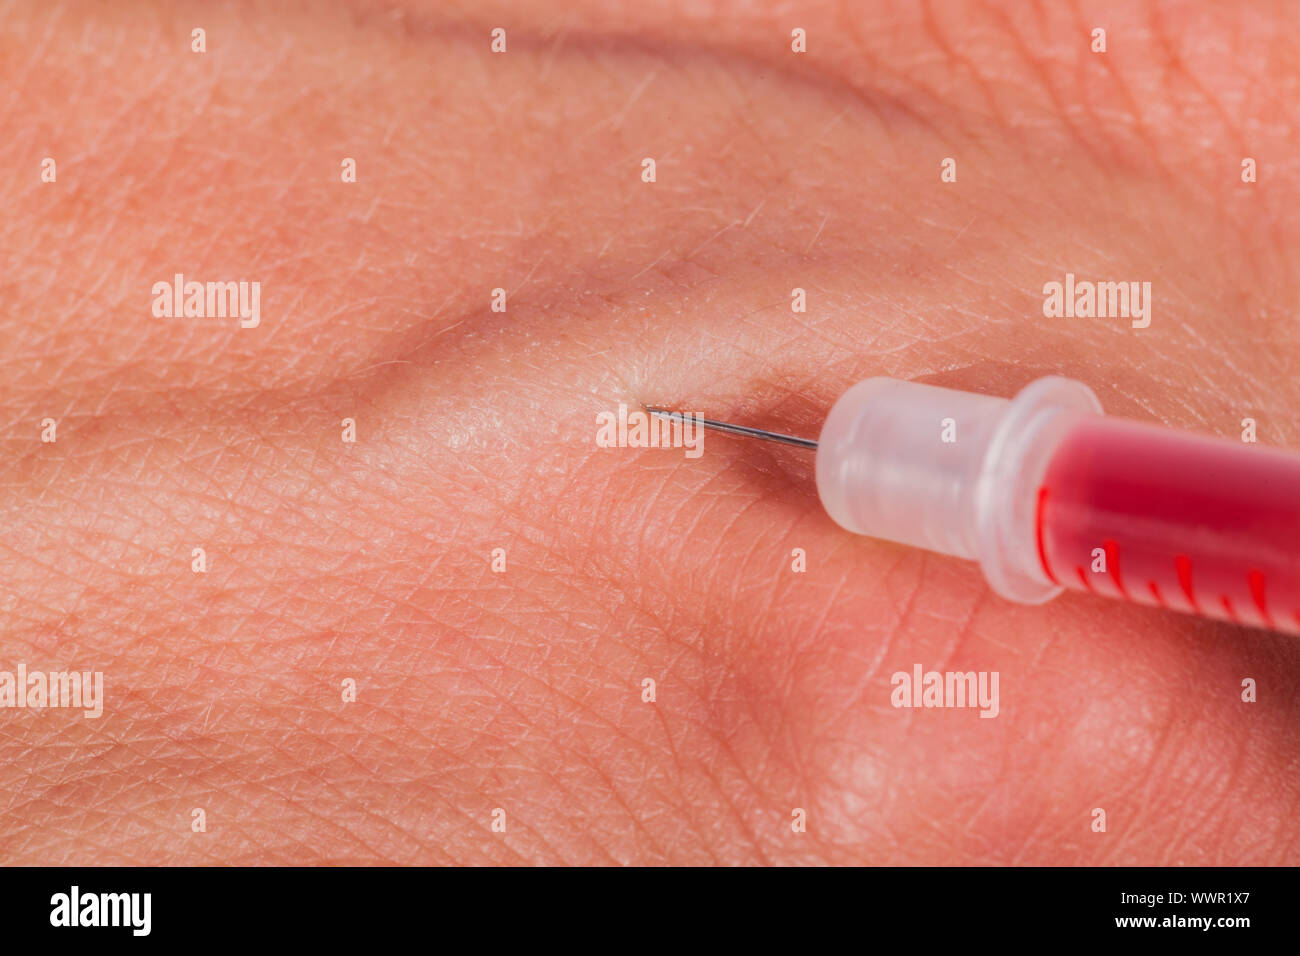 Subcutaneous medical injection concept Stock Photo